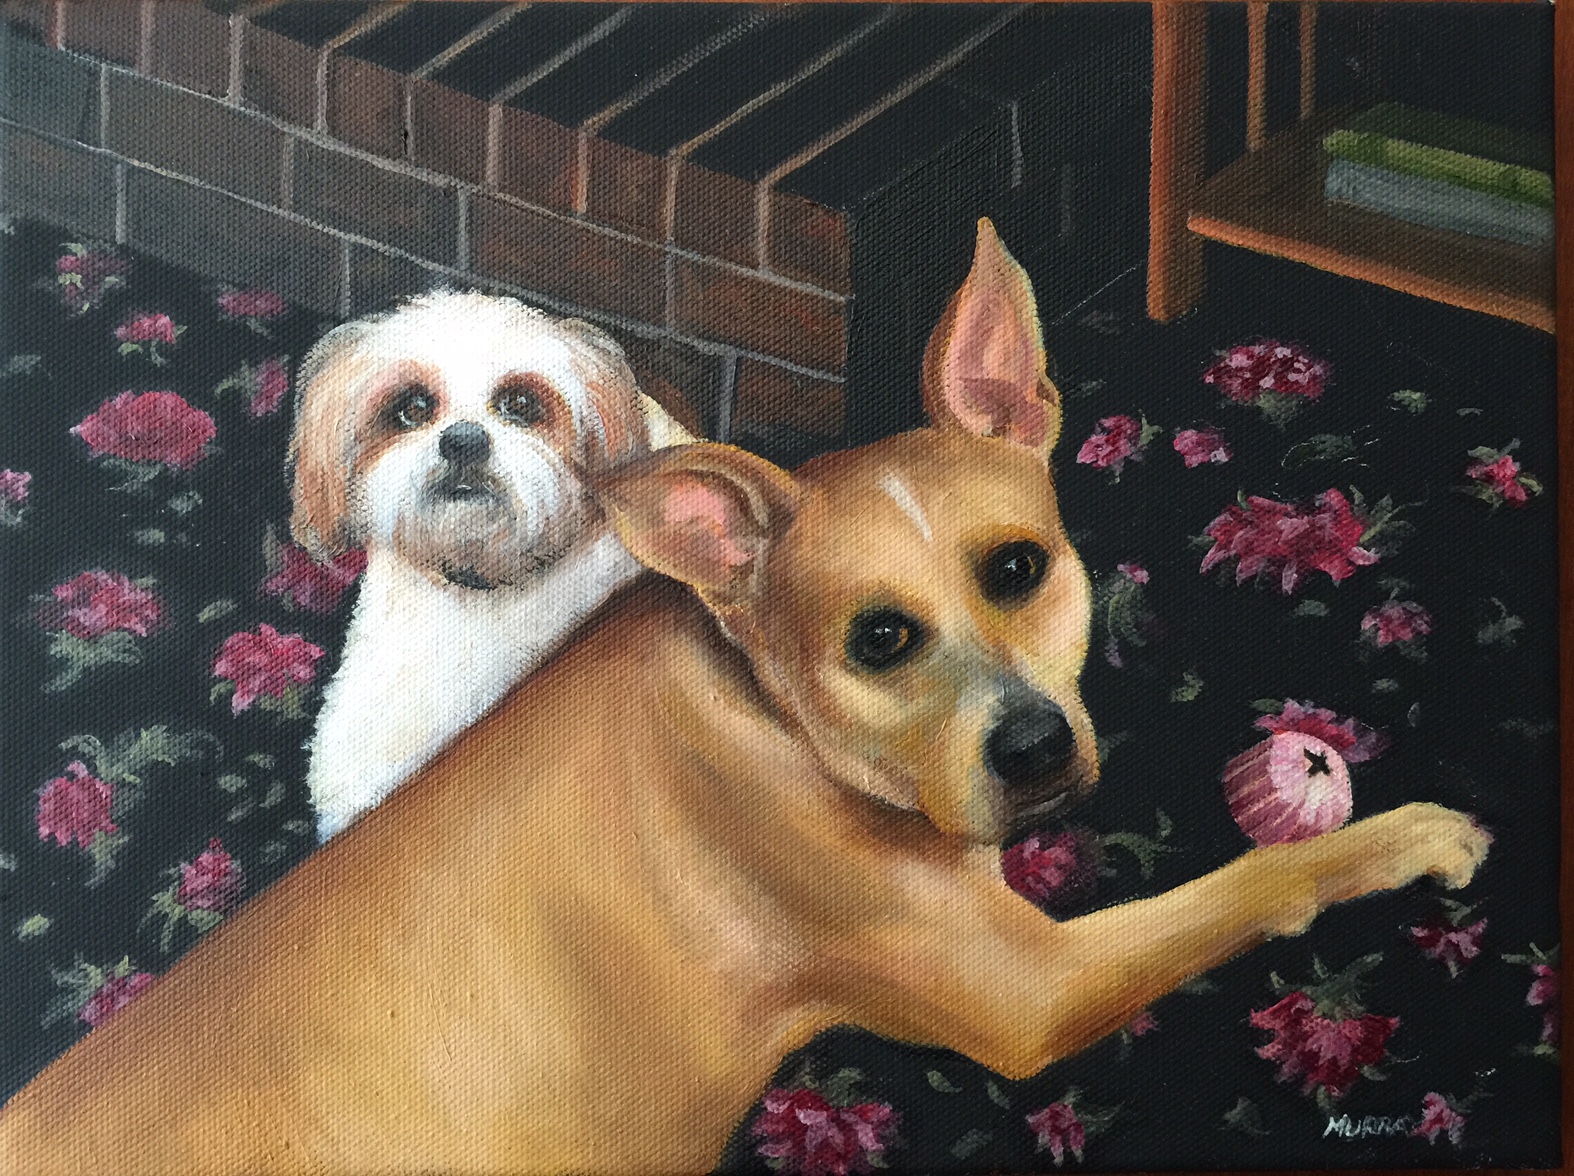 The Shitzu and the Pitbull, 10 x 12 on black canvas